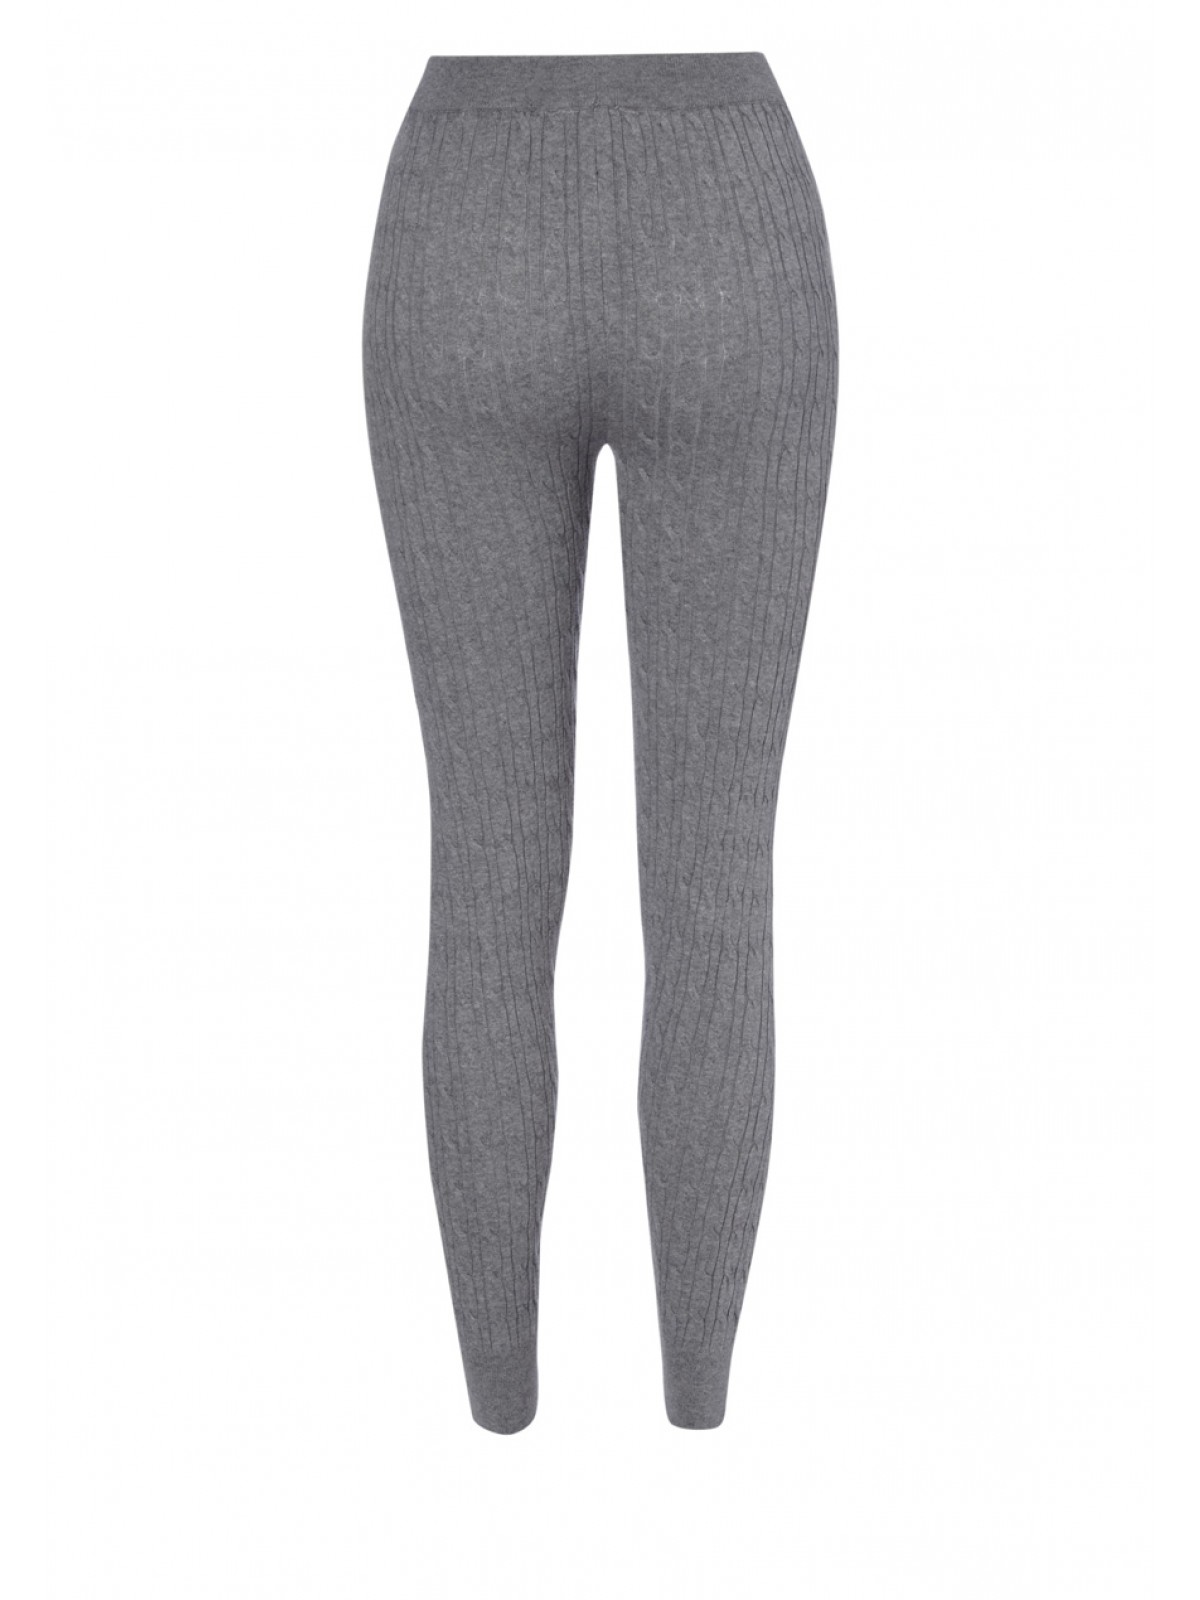 Knitted Leggings home; womens cable knit leggings. previousnext zoom RGMCWOJ